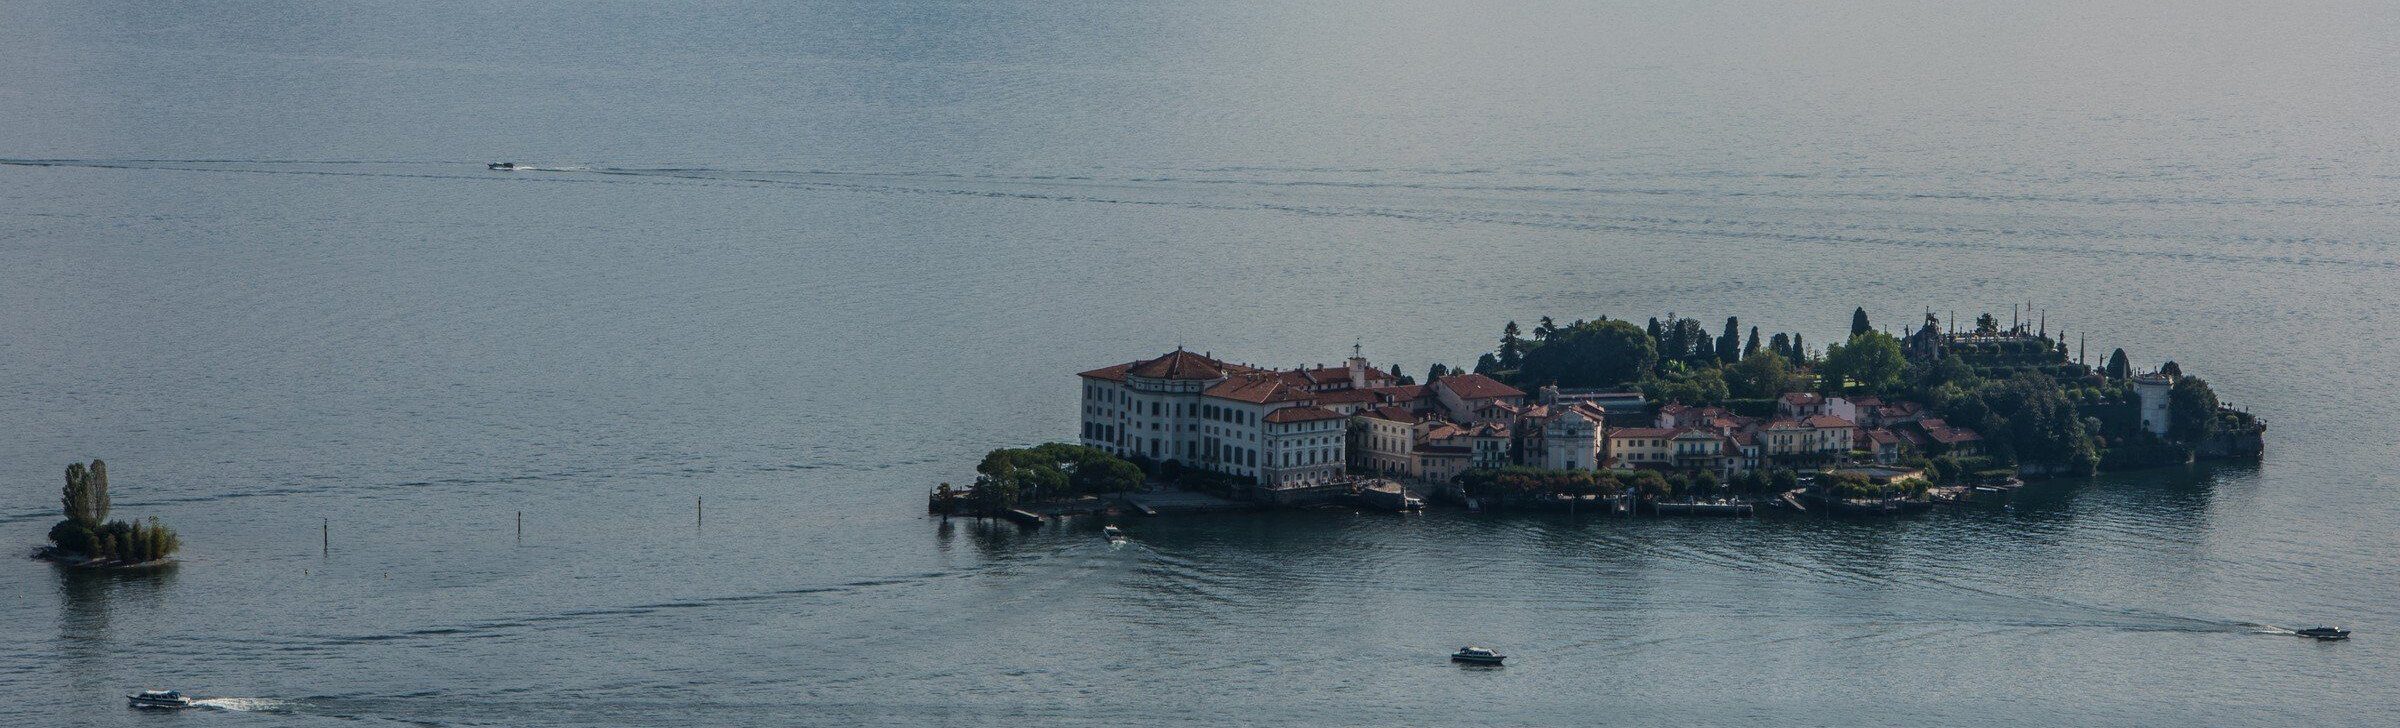 ISOLA BELLA, VIEW FROM CABLE CAR, STRESA (PROVINCE OF VERBANO CUSIO OSSOLA)